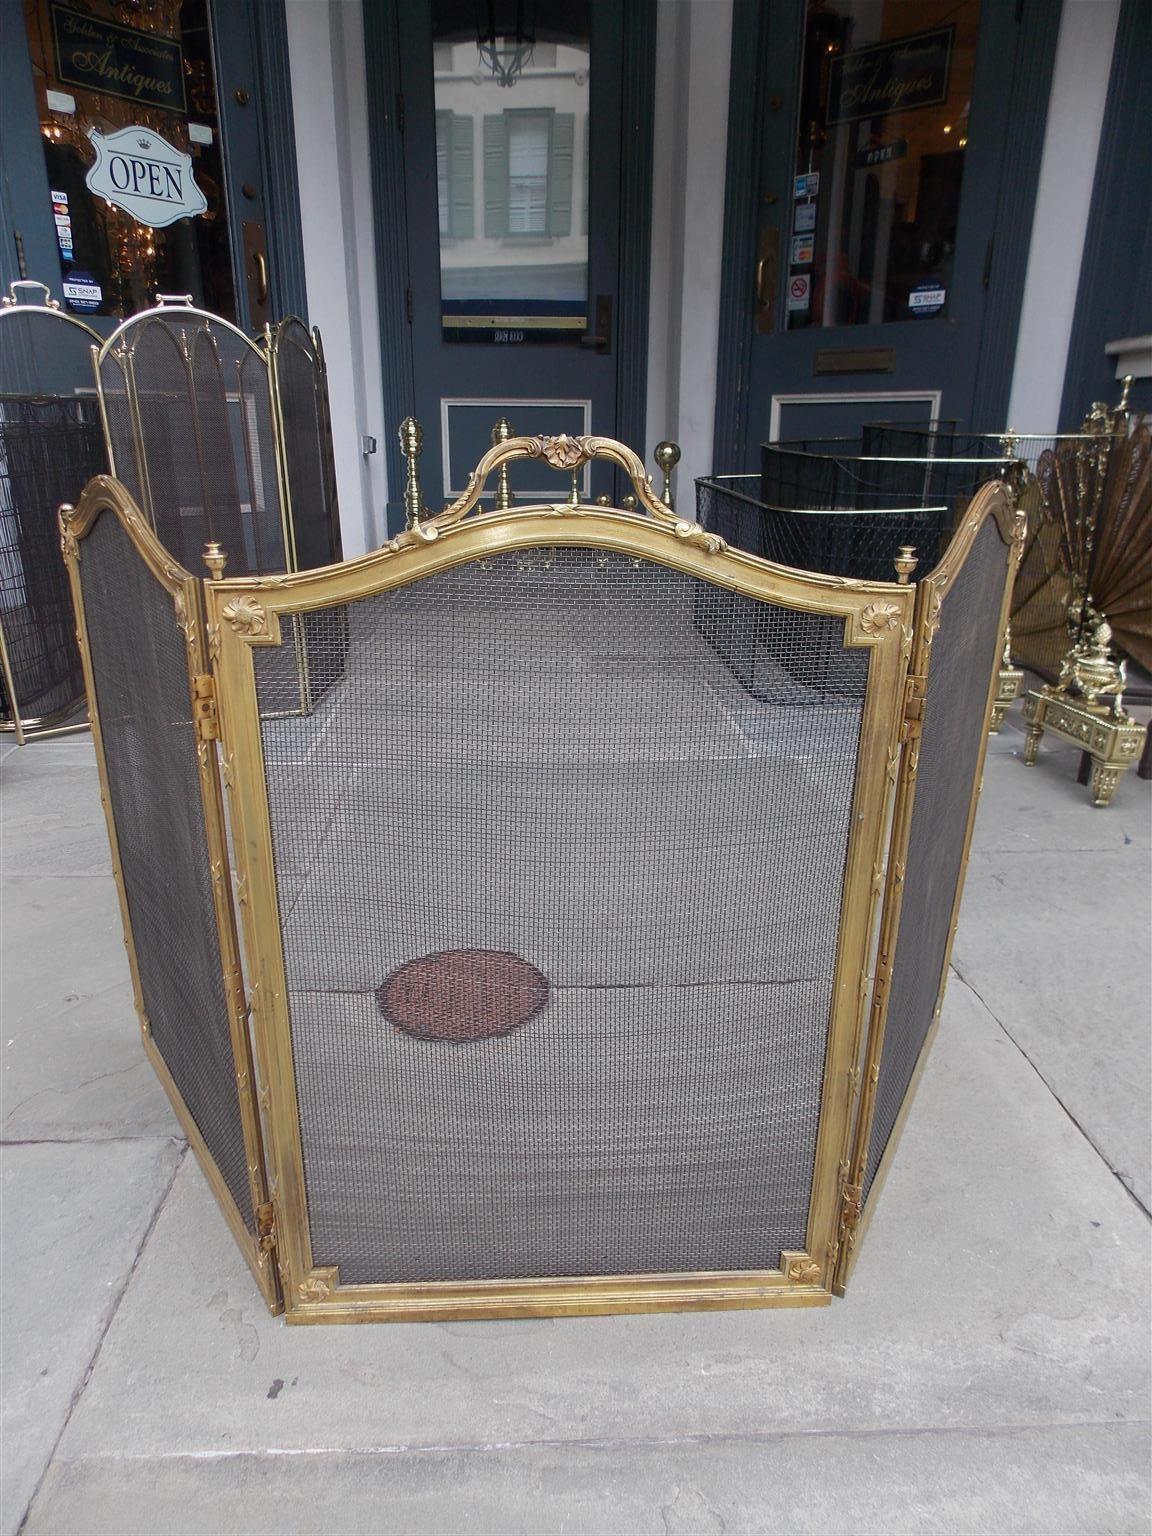 French gilt bronze arched three-panel folding fireplace screen with a scrolled centered floral and shell handle, reeded ribbon border, flanking urn finials, corner floral medallions, and decorative acanthus corners, Early 19th century
Each panel